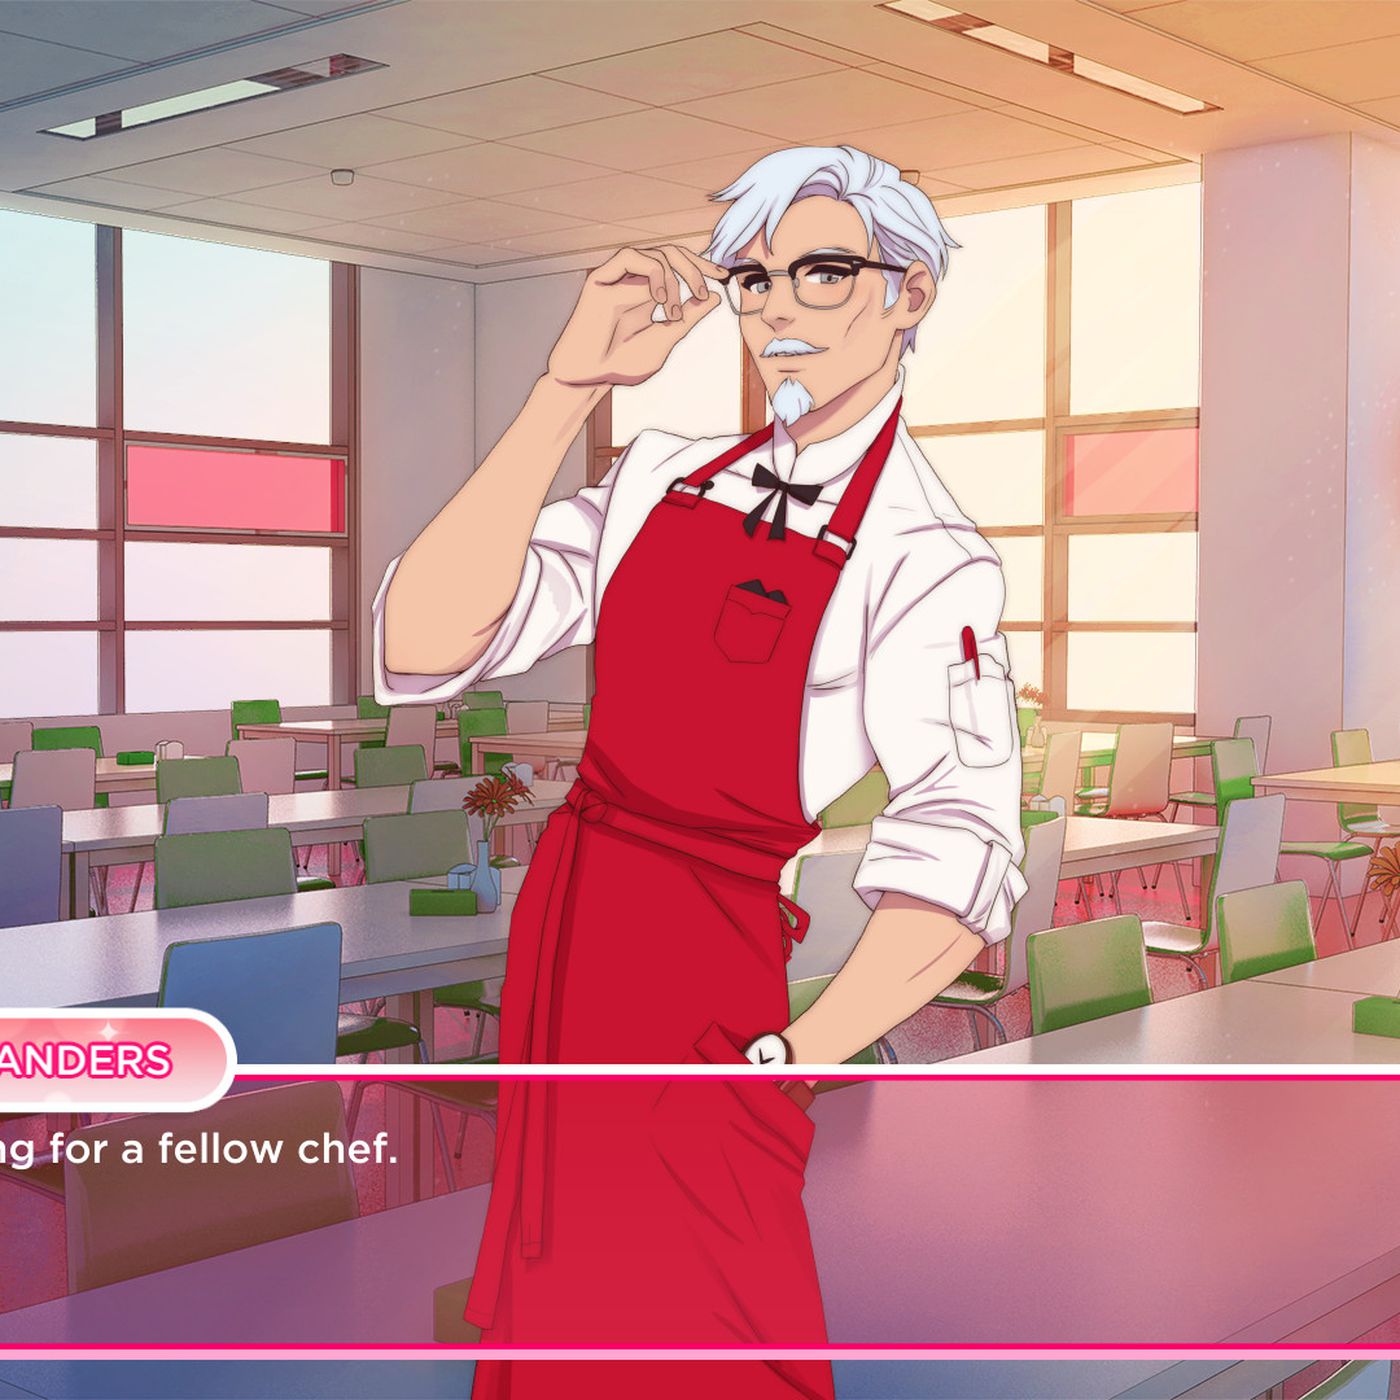 KFC dating sim: KFC's game gets players to fall in love with its brand - Vox